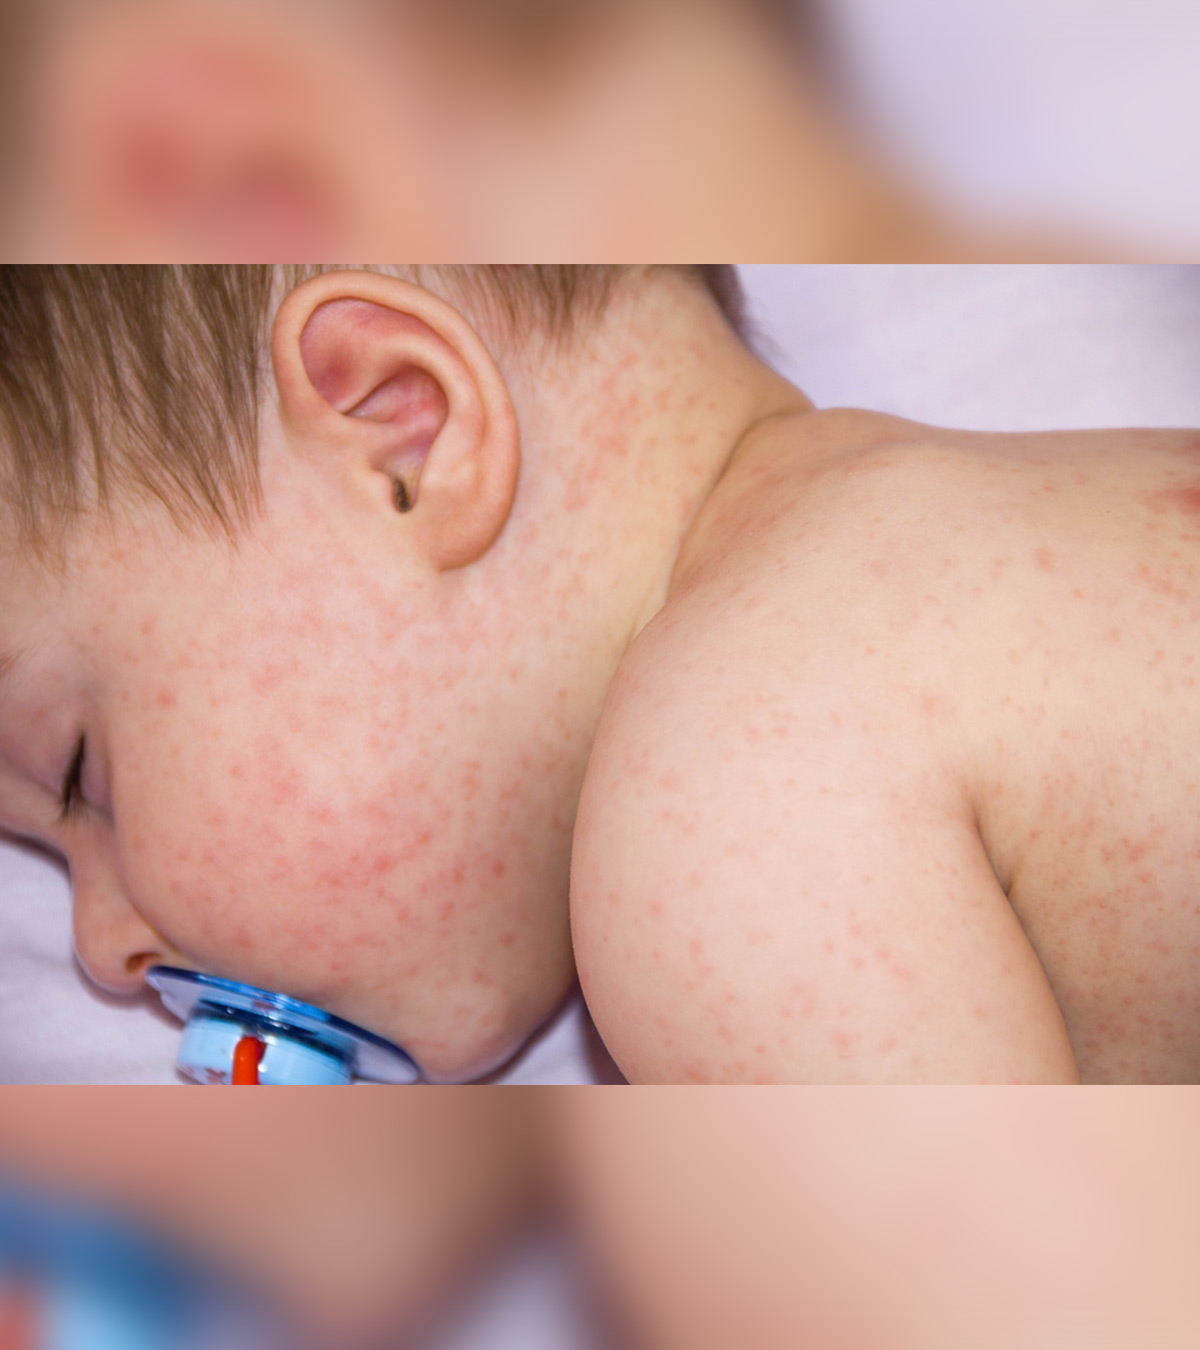 Rashes After Fever In Toddlers: Causes & Tips To Manage It